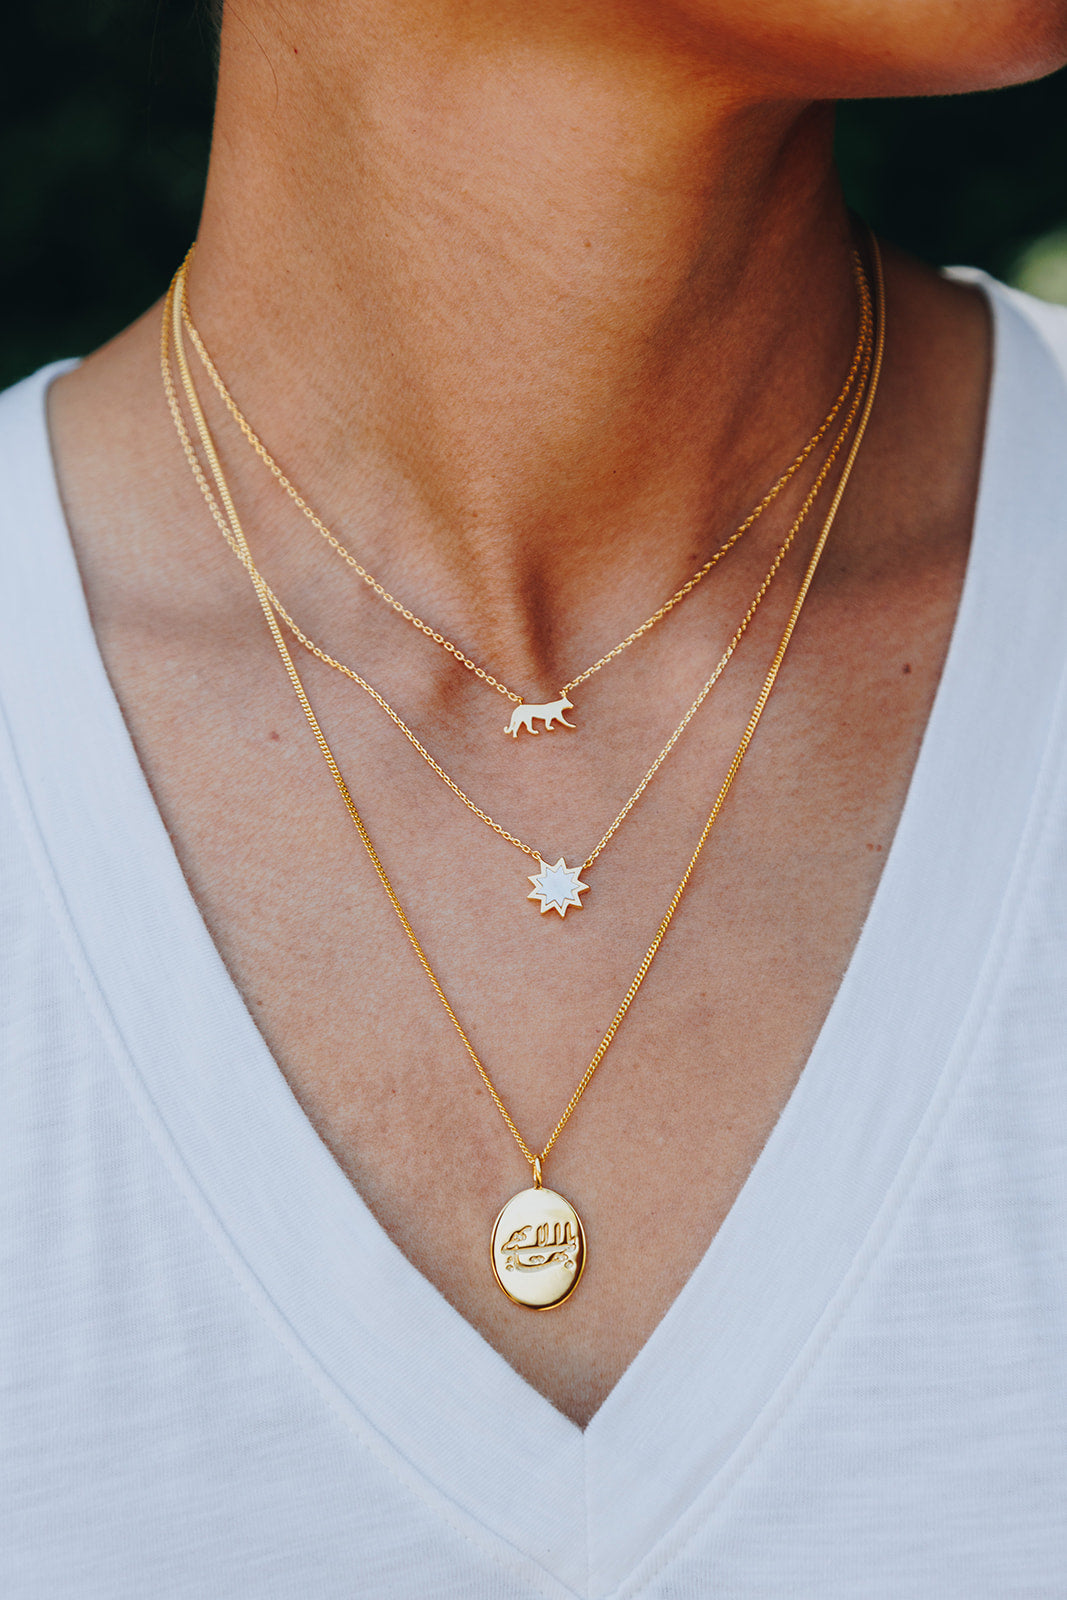 oval bahai symbol greatest name arabic gold pendant with nine pointed star mother of pearl necklace and dainty lioness necklace